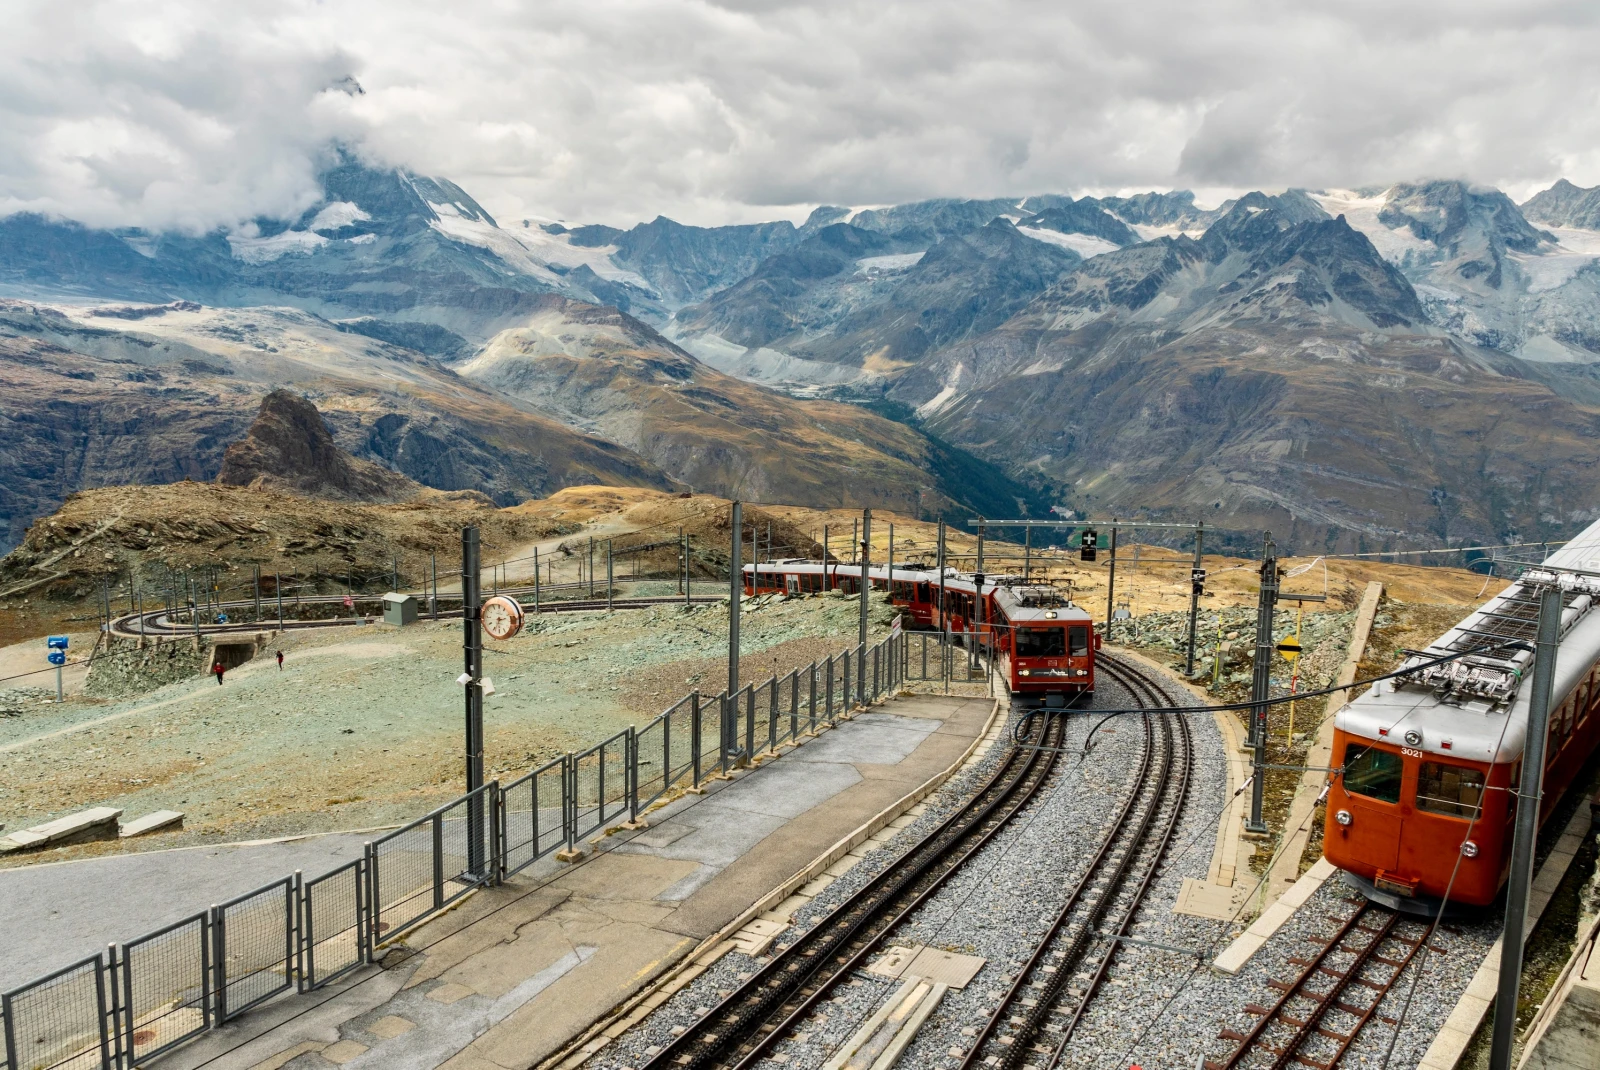 The Gornergrat Railway is a mountain rack railway, located in the Swiss canton of Valais.